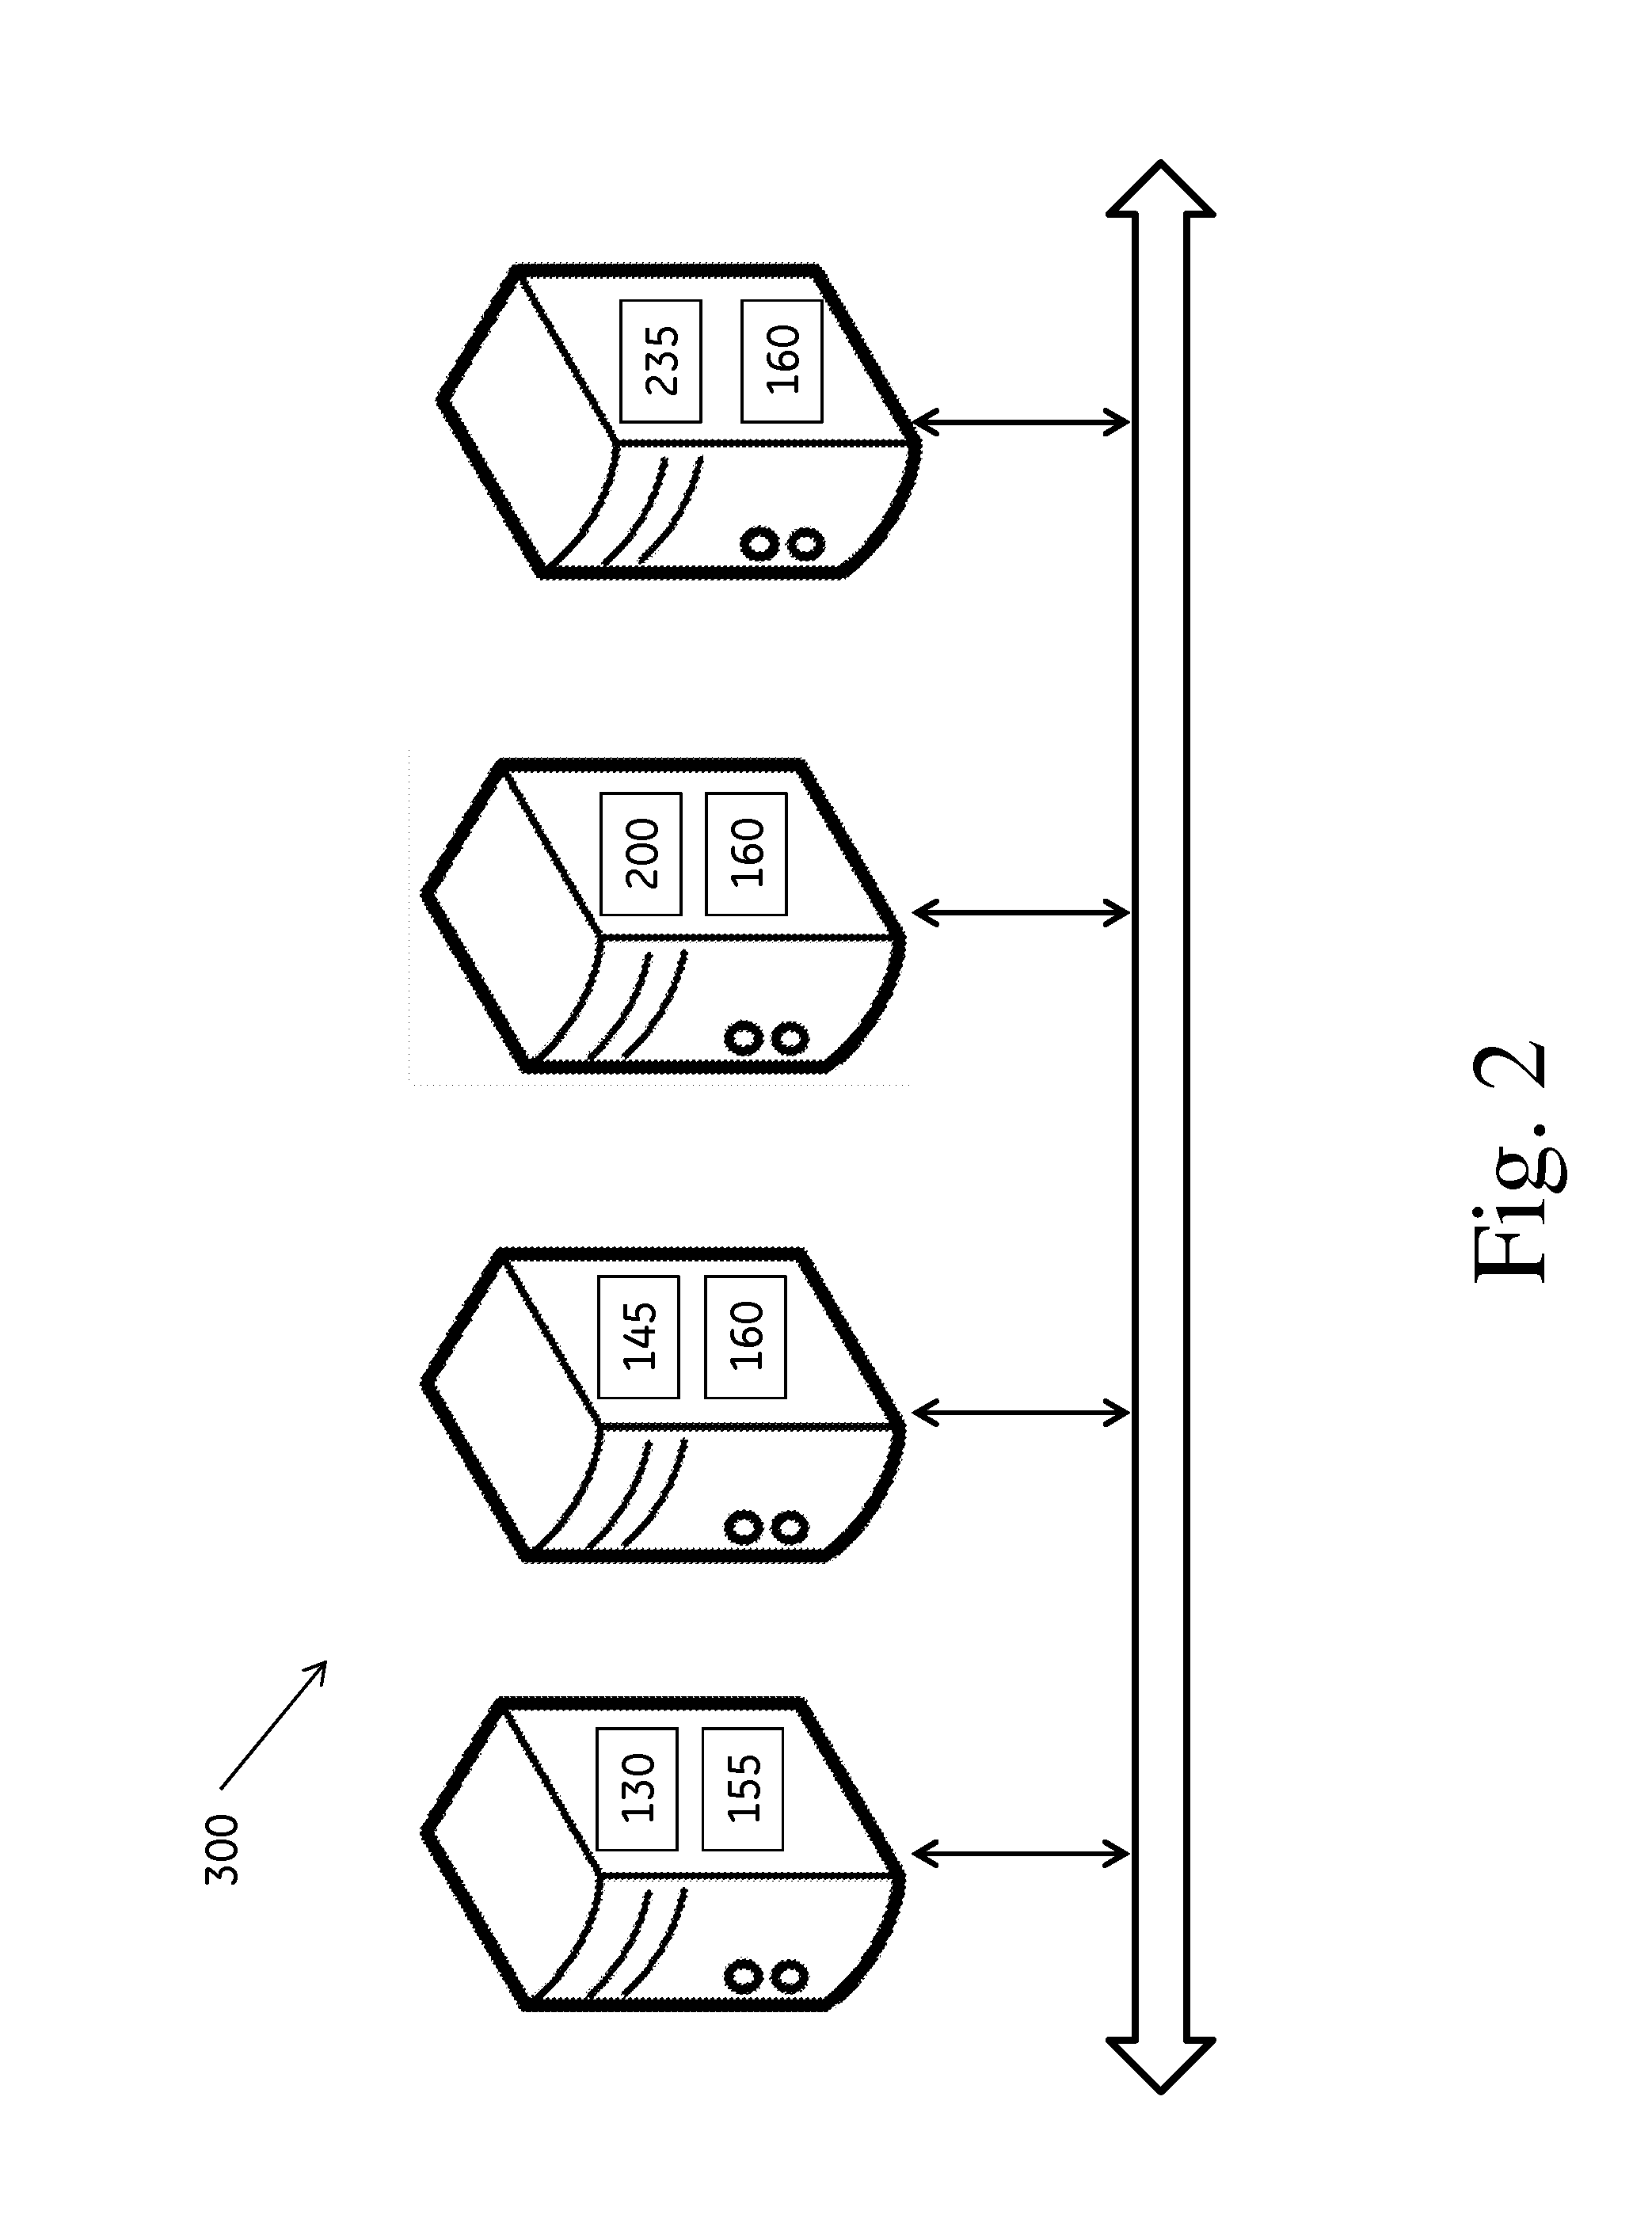 System and method for storage, querying, and analysis service for time series data